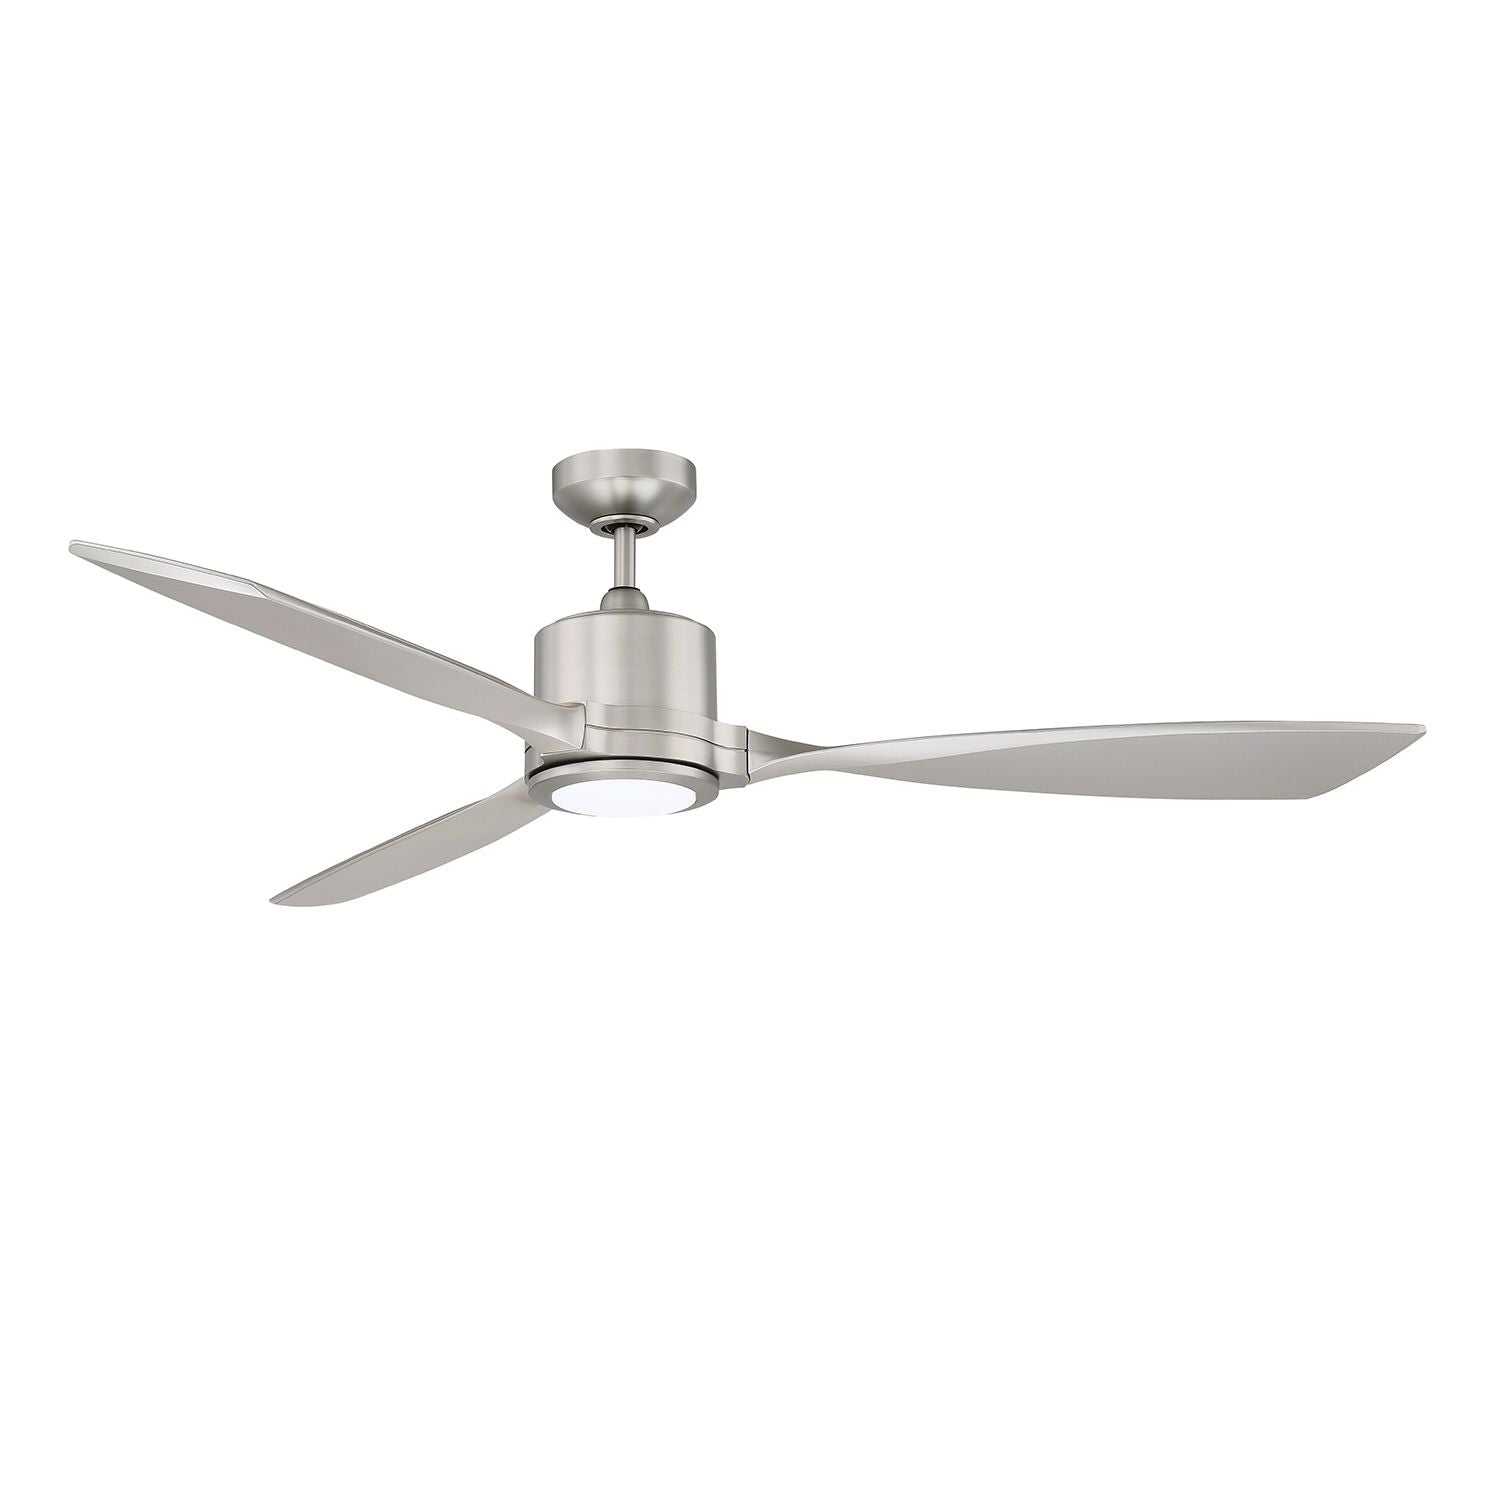 Altair Ceiling Fan Satin Nickel with matching blades